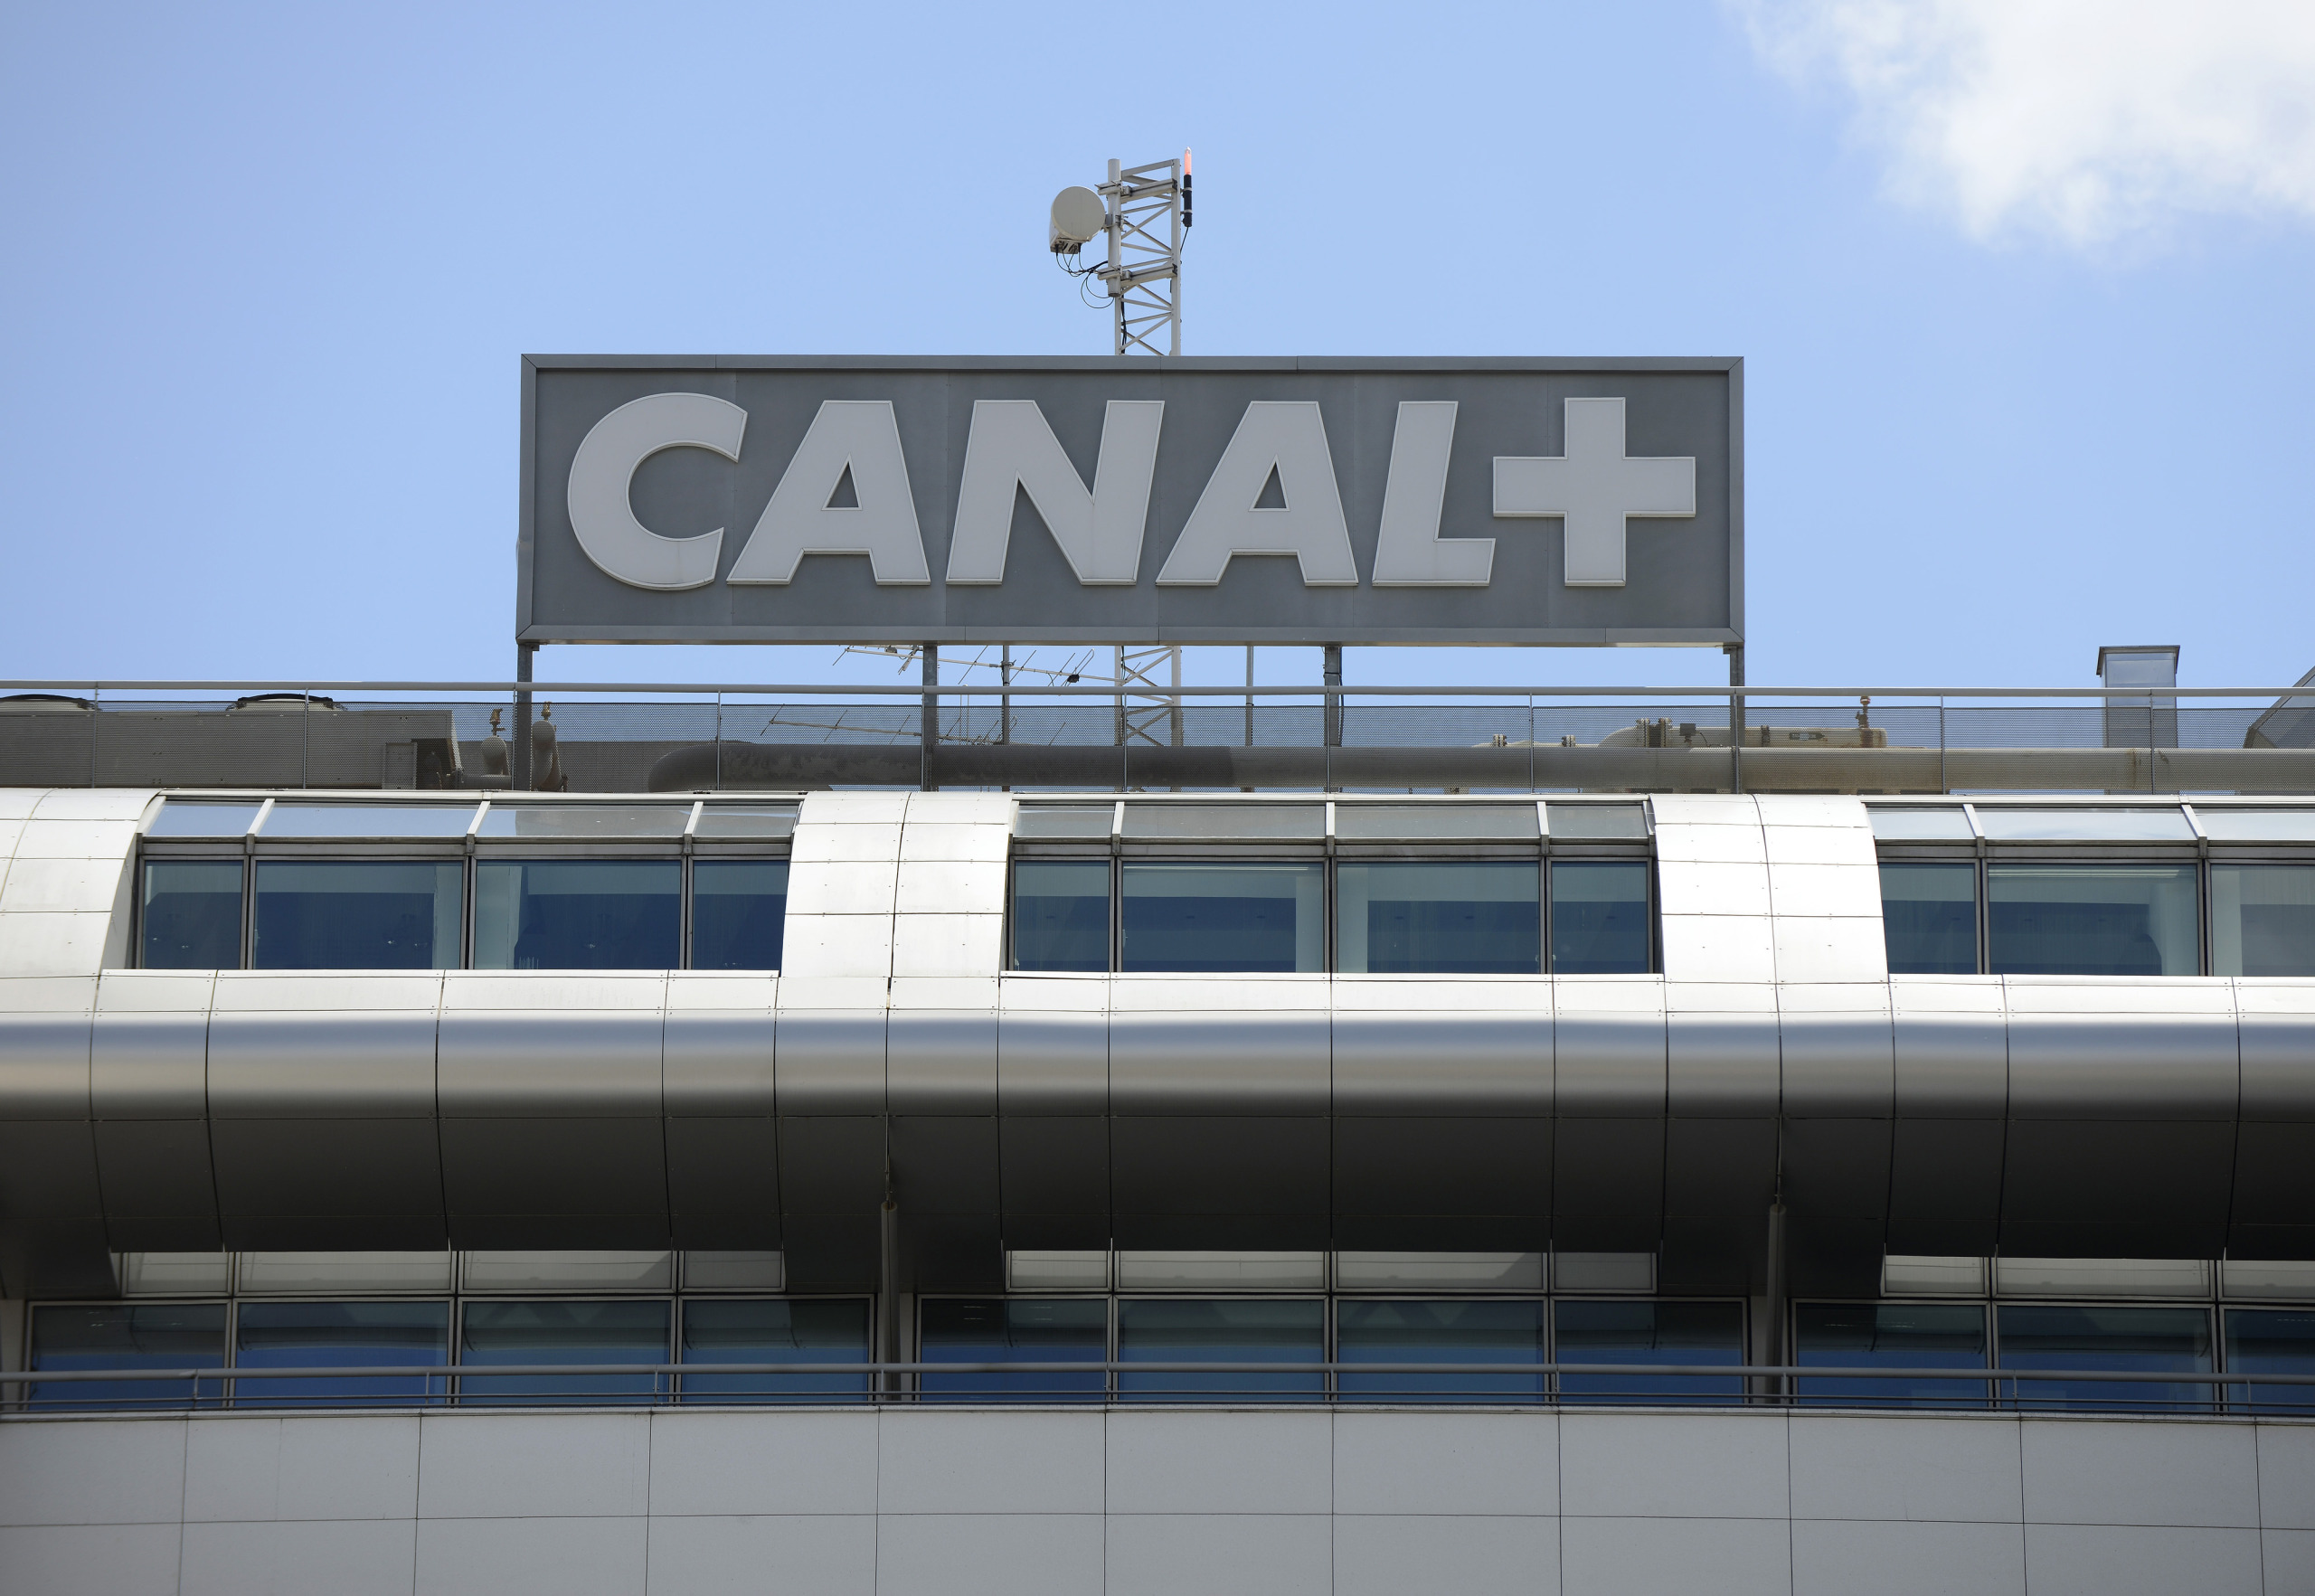 Canal+ signage is displayed&nbsp;in Issy les Moulineaux, France.